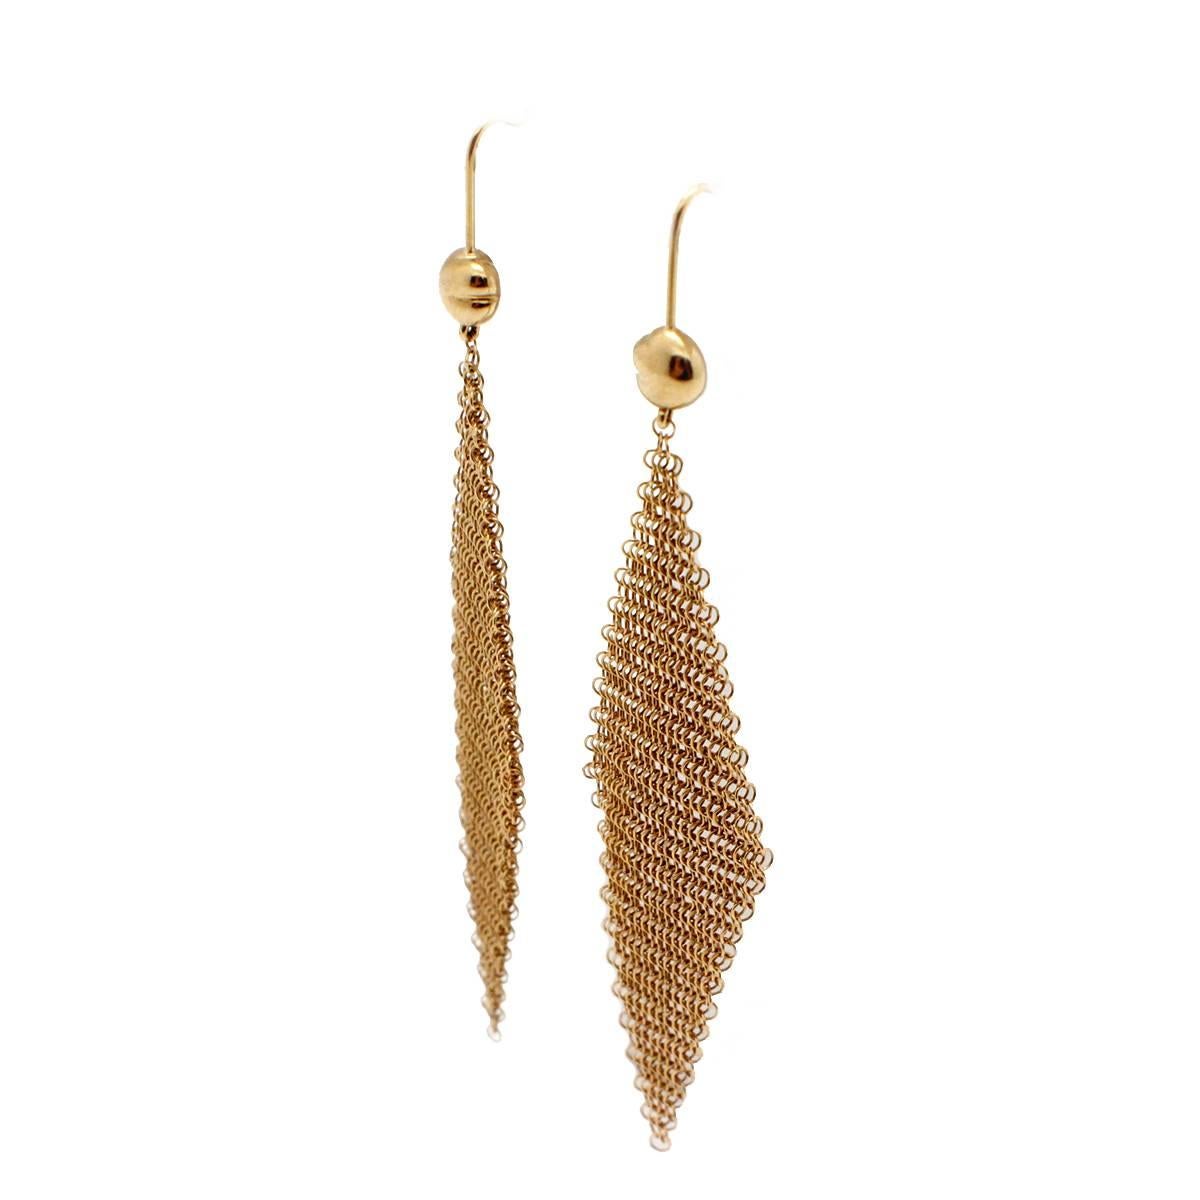 The form is malleable and ergonomic in the way it drapes over the body's contours. Earrings in 18k gold, for pierced ears. Size small, 3